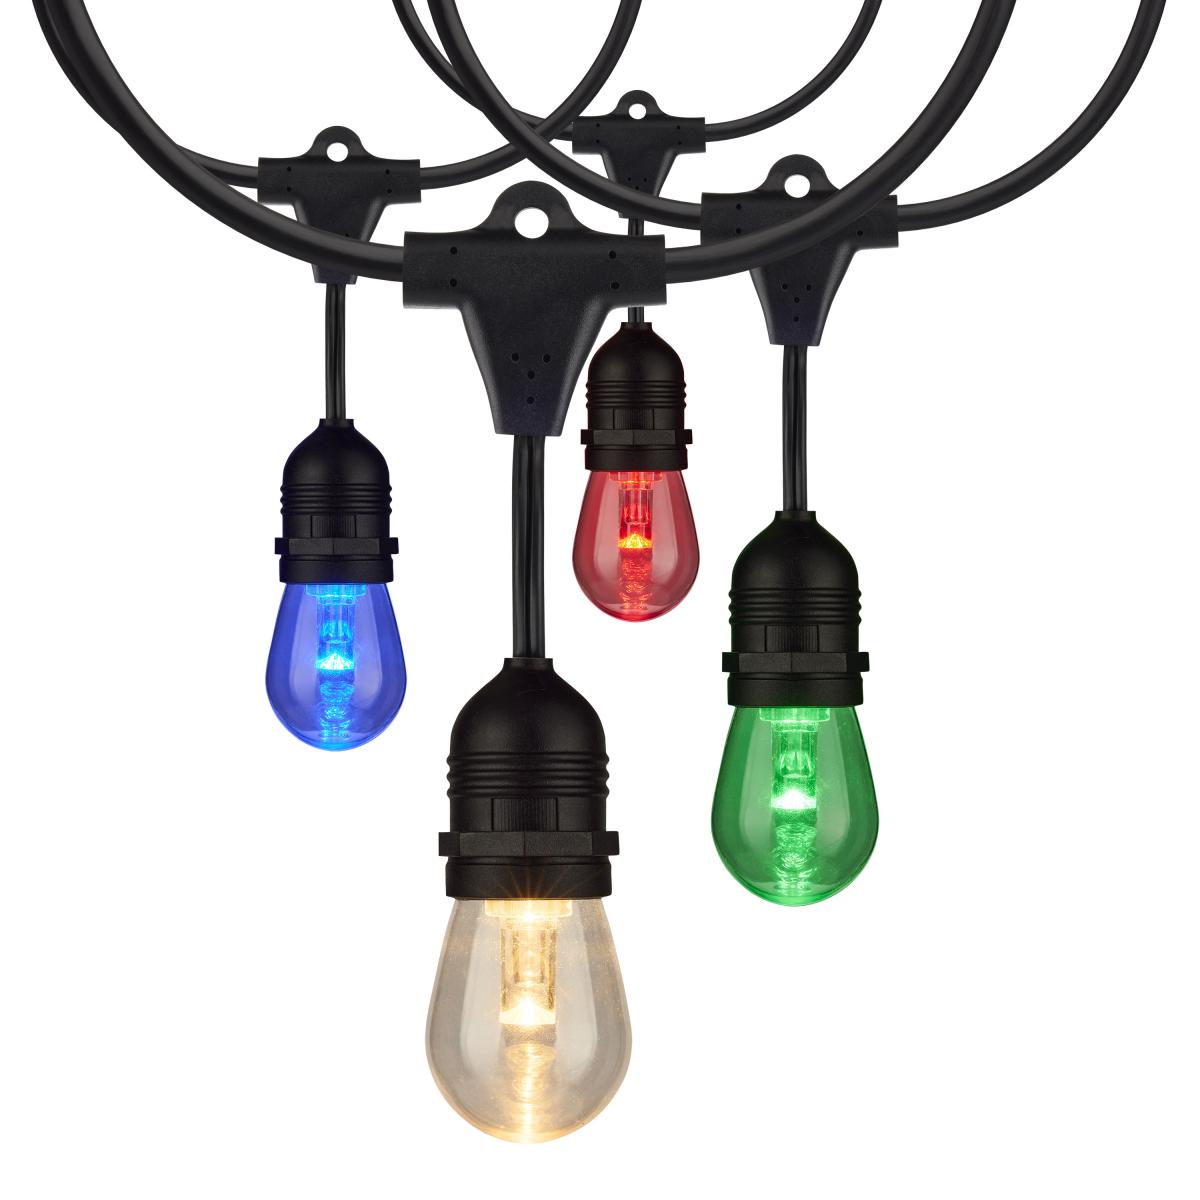 Satco S8031 24FT/LED/SL/S14/IRR/RGBW/12 24Ft; LED String Light; 12-S14 lamps; 12 Volts; RGBW with Infrared Remote